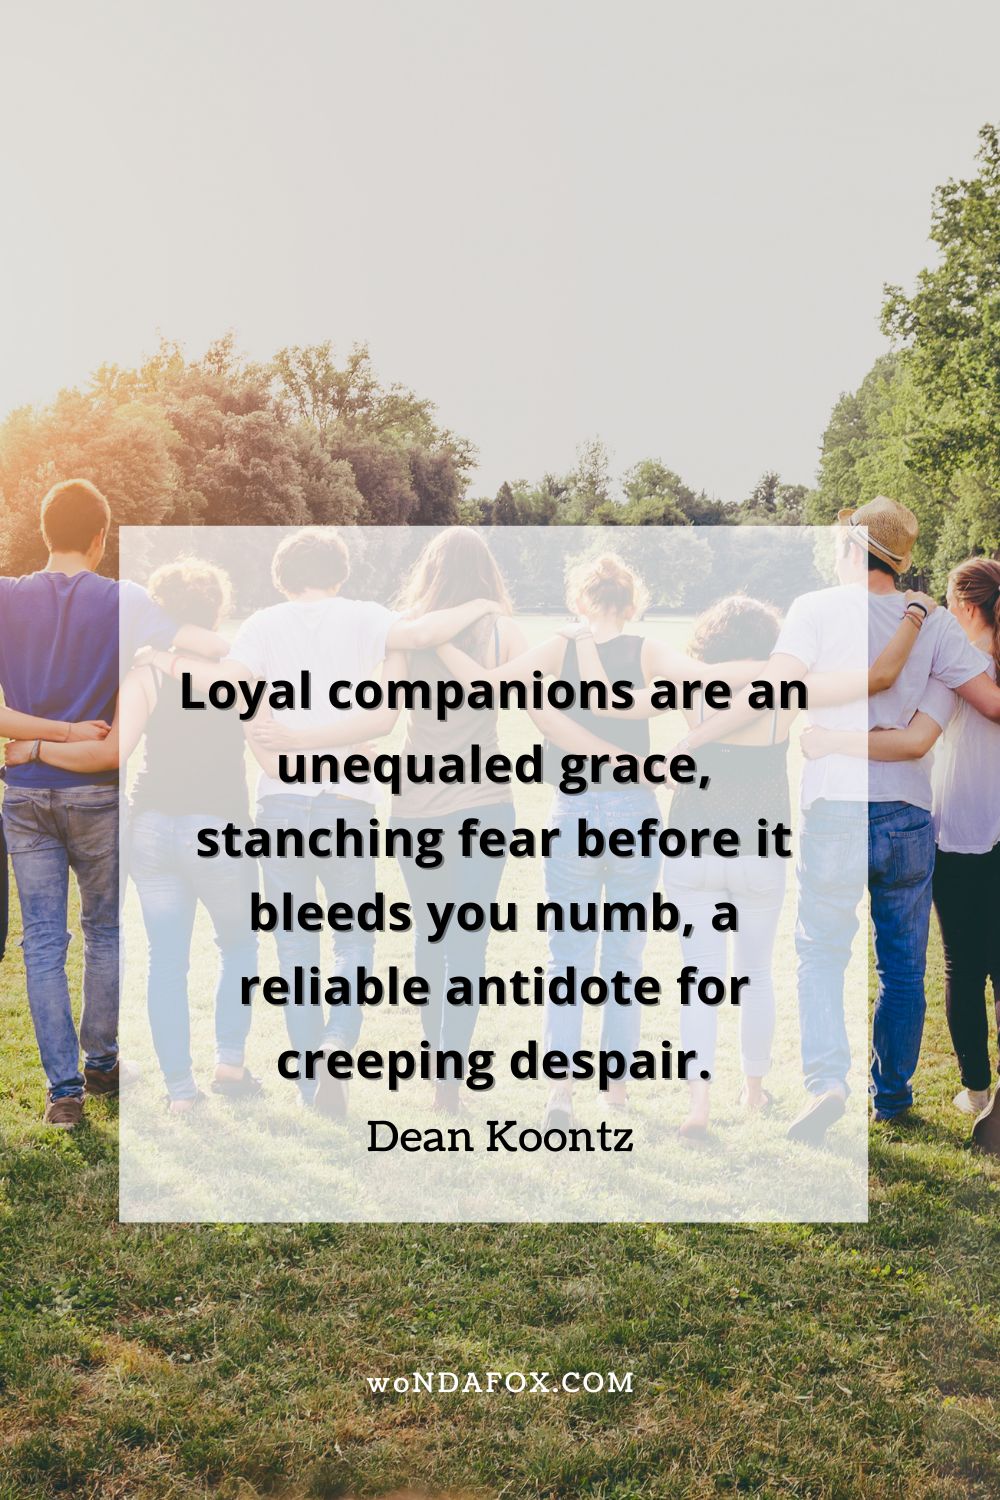 “Loyal companions are an unequaled grace, stanching fear before it bleeds you numb, a reliable antidote for creeping despair.” 